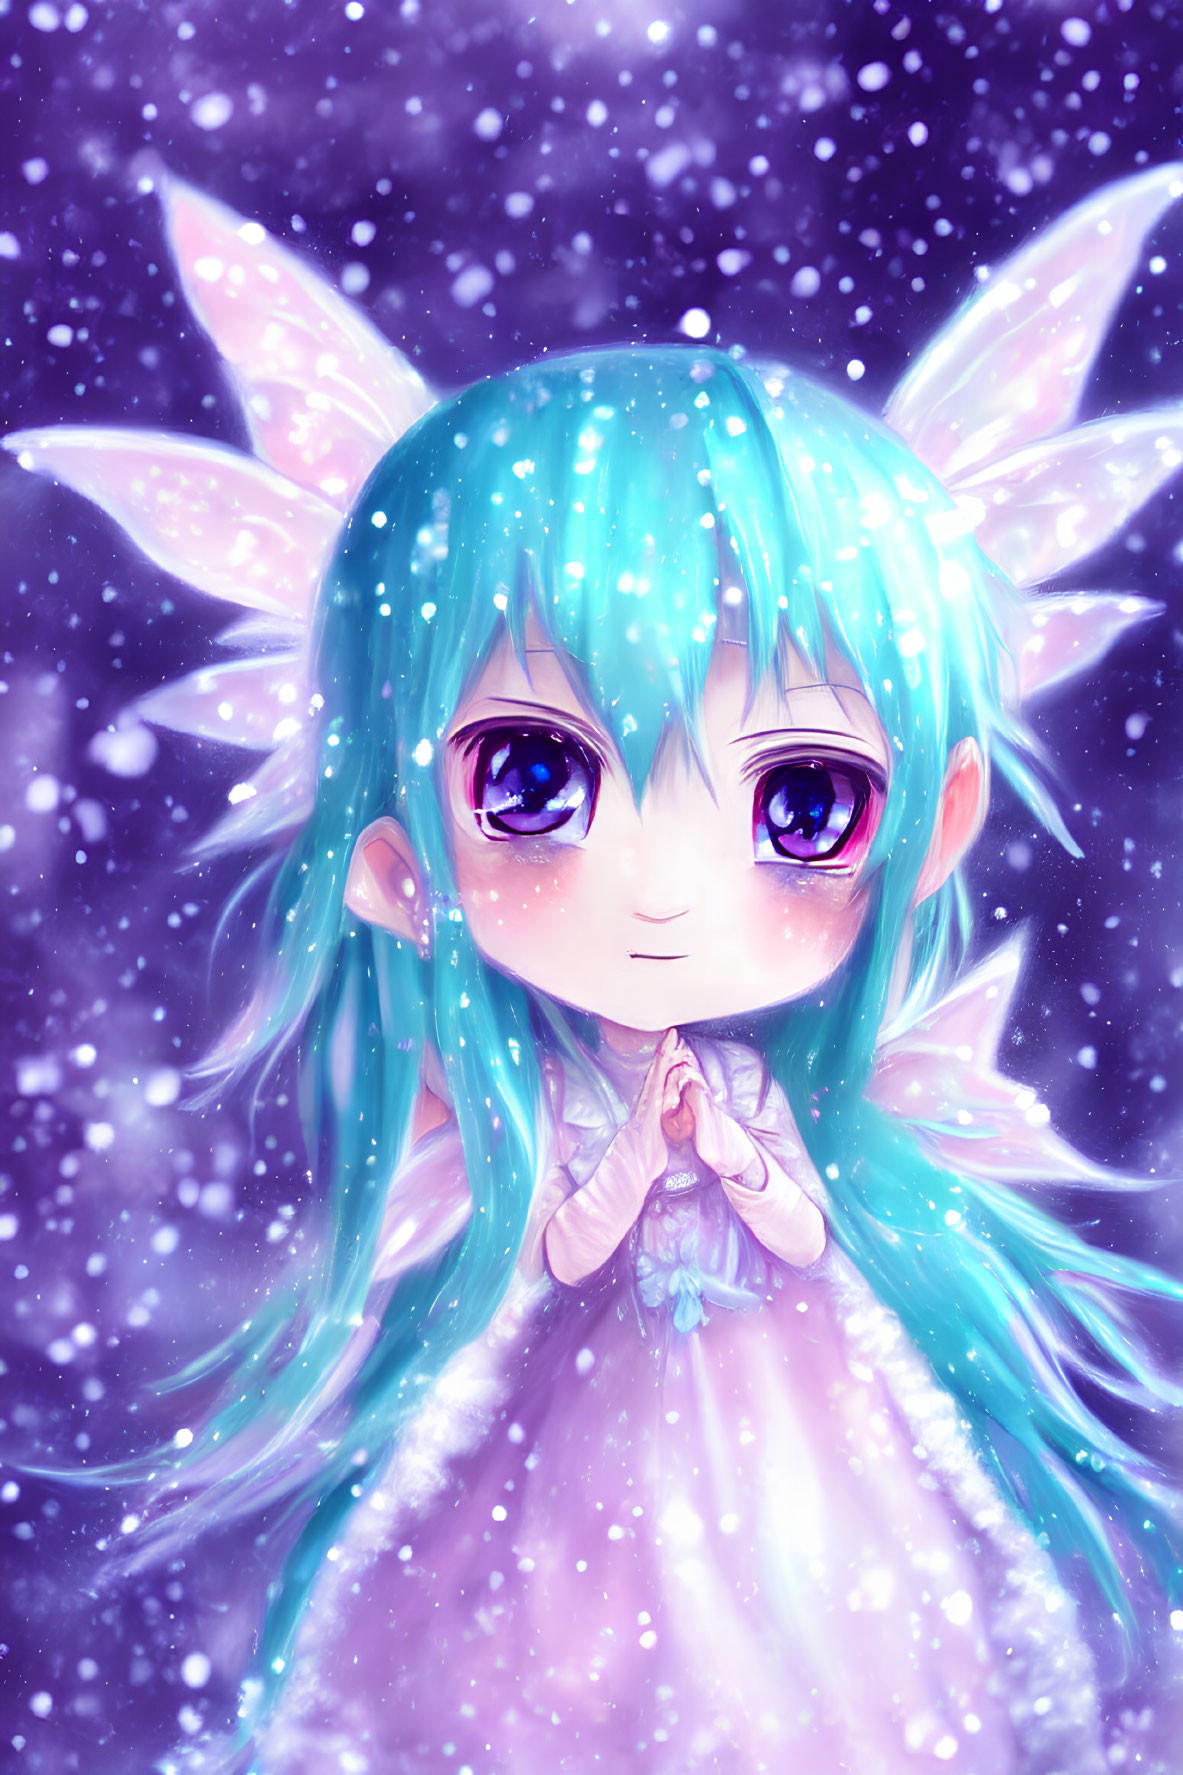 Blue-haired anime character in white dress amid snowflakes on starry backdrop